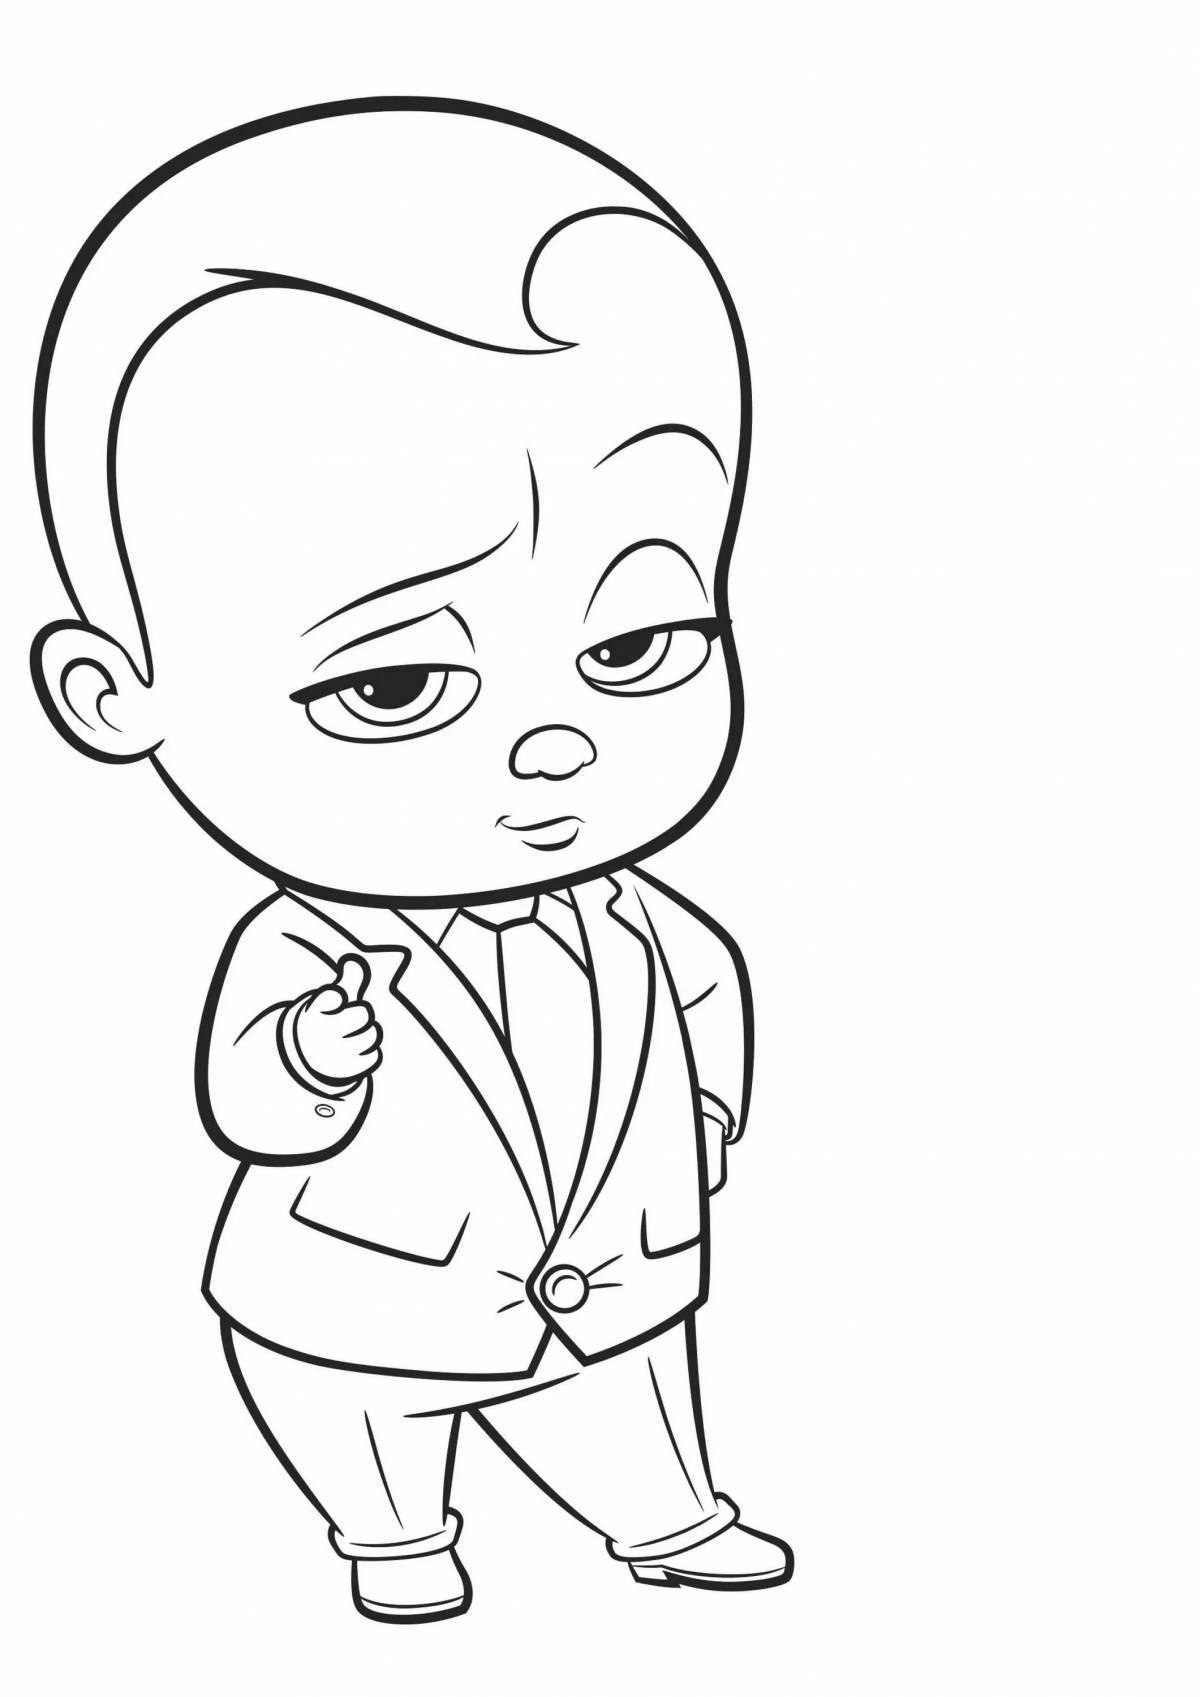 Boss baby figure live coloring